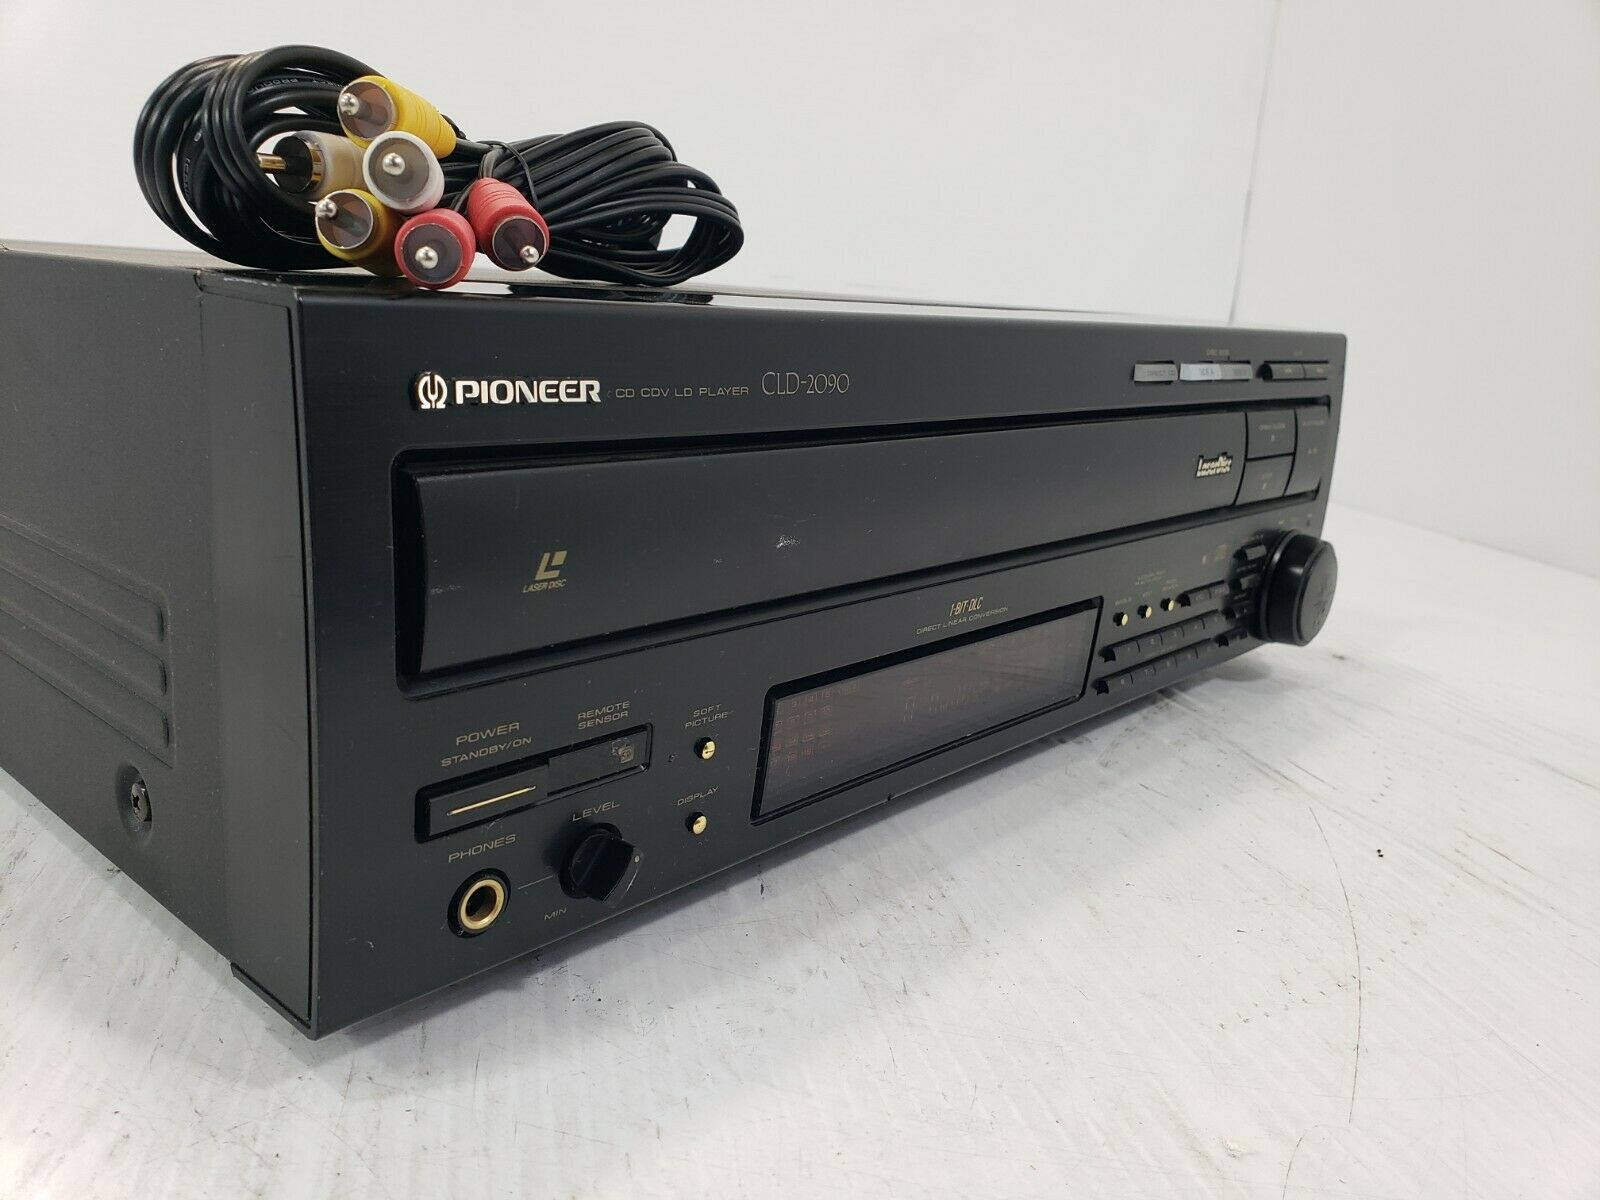 PIONEER CLD-2090 CD/LD LASER DISC PLAYER ■■TESTED■■